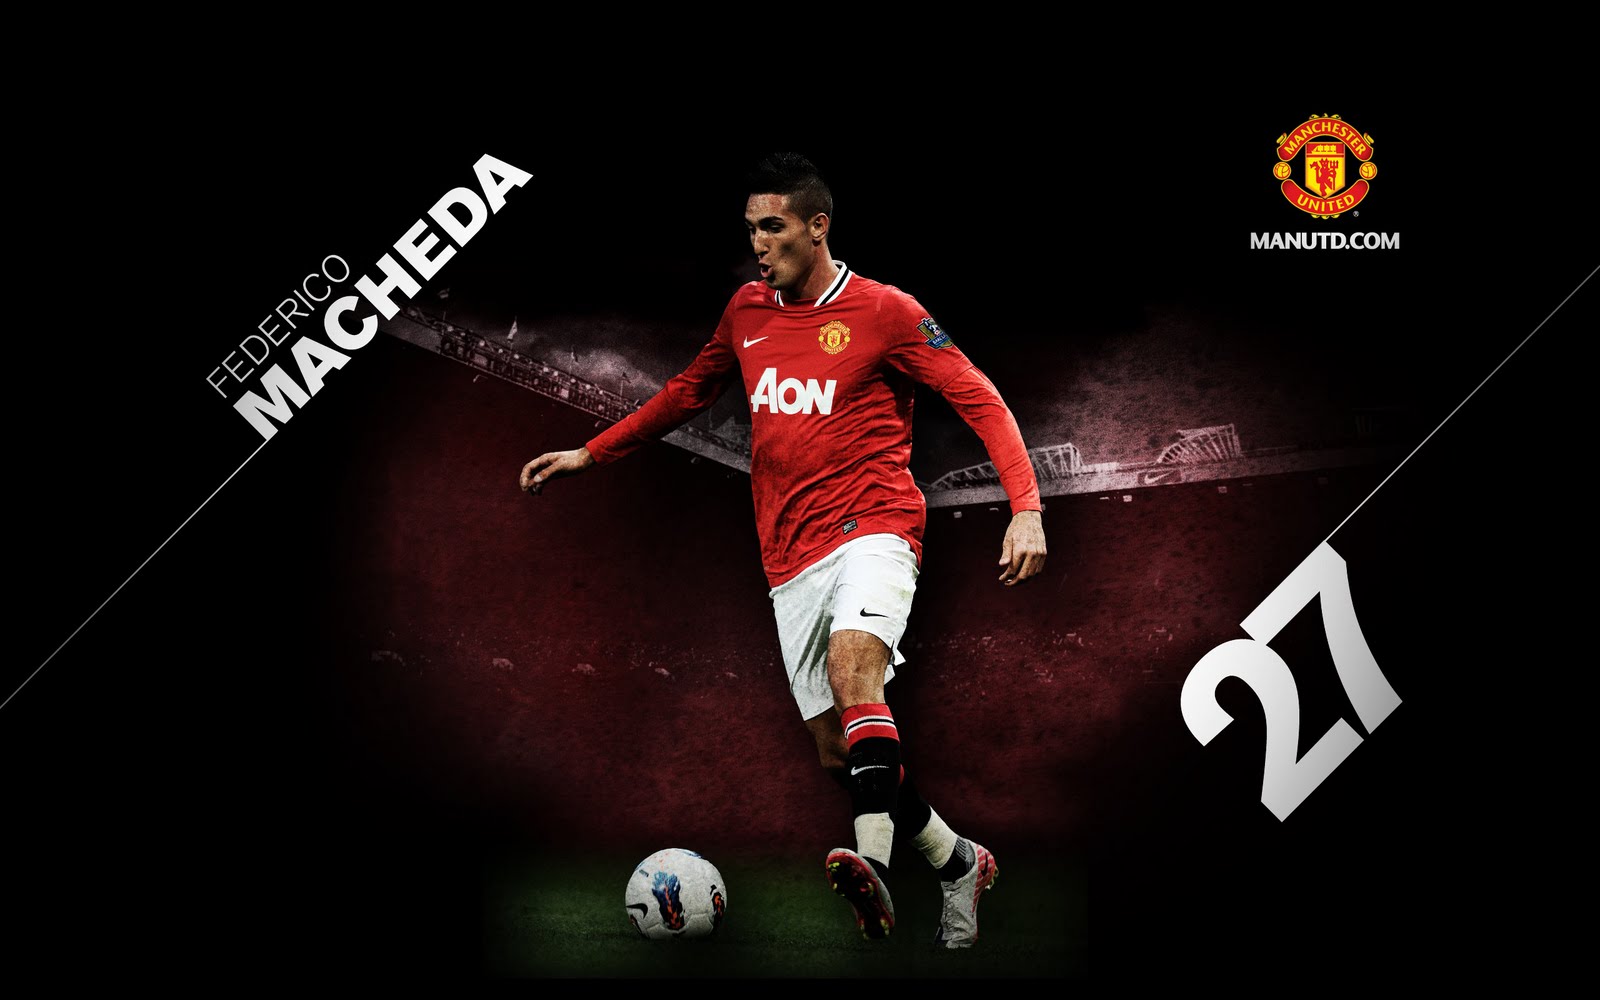 Macheda - Picture Gallery